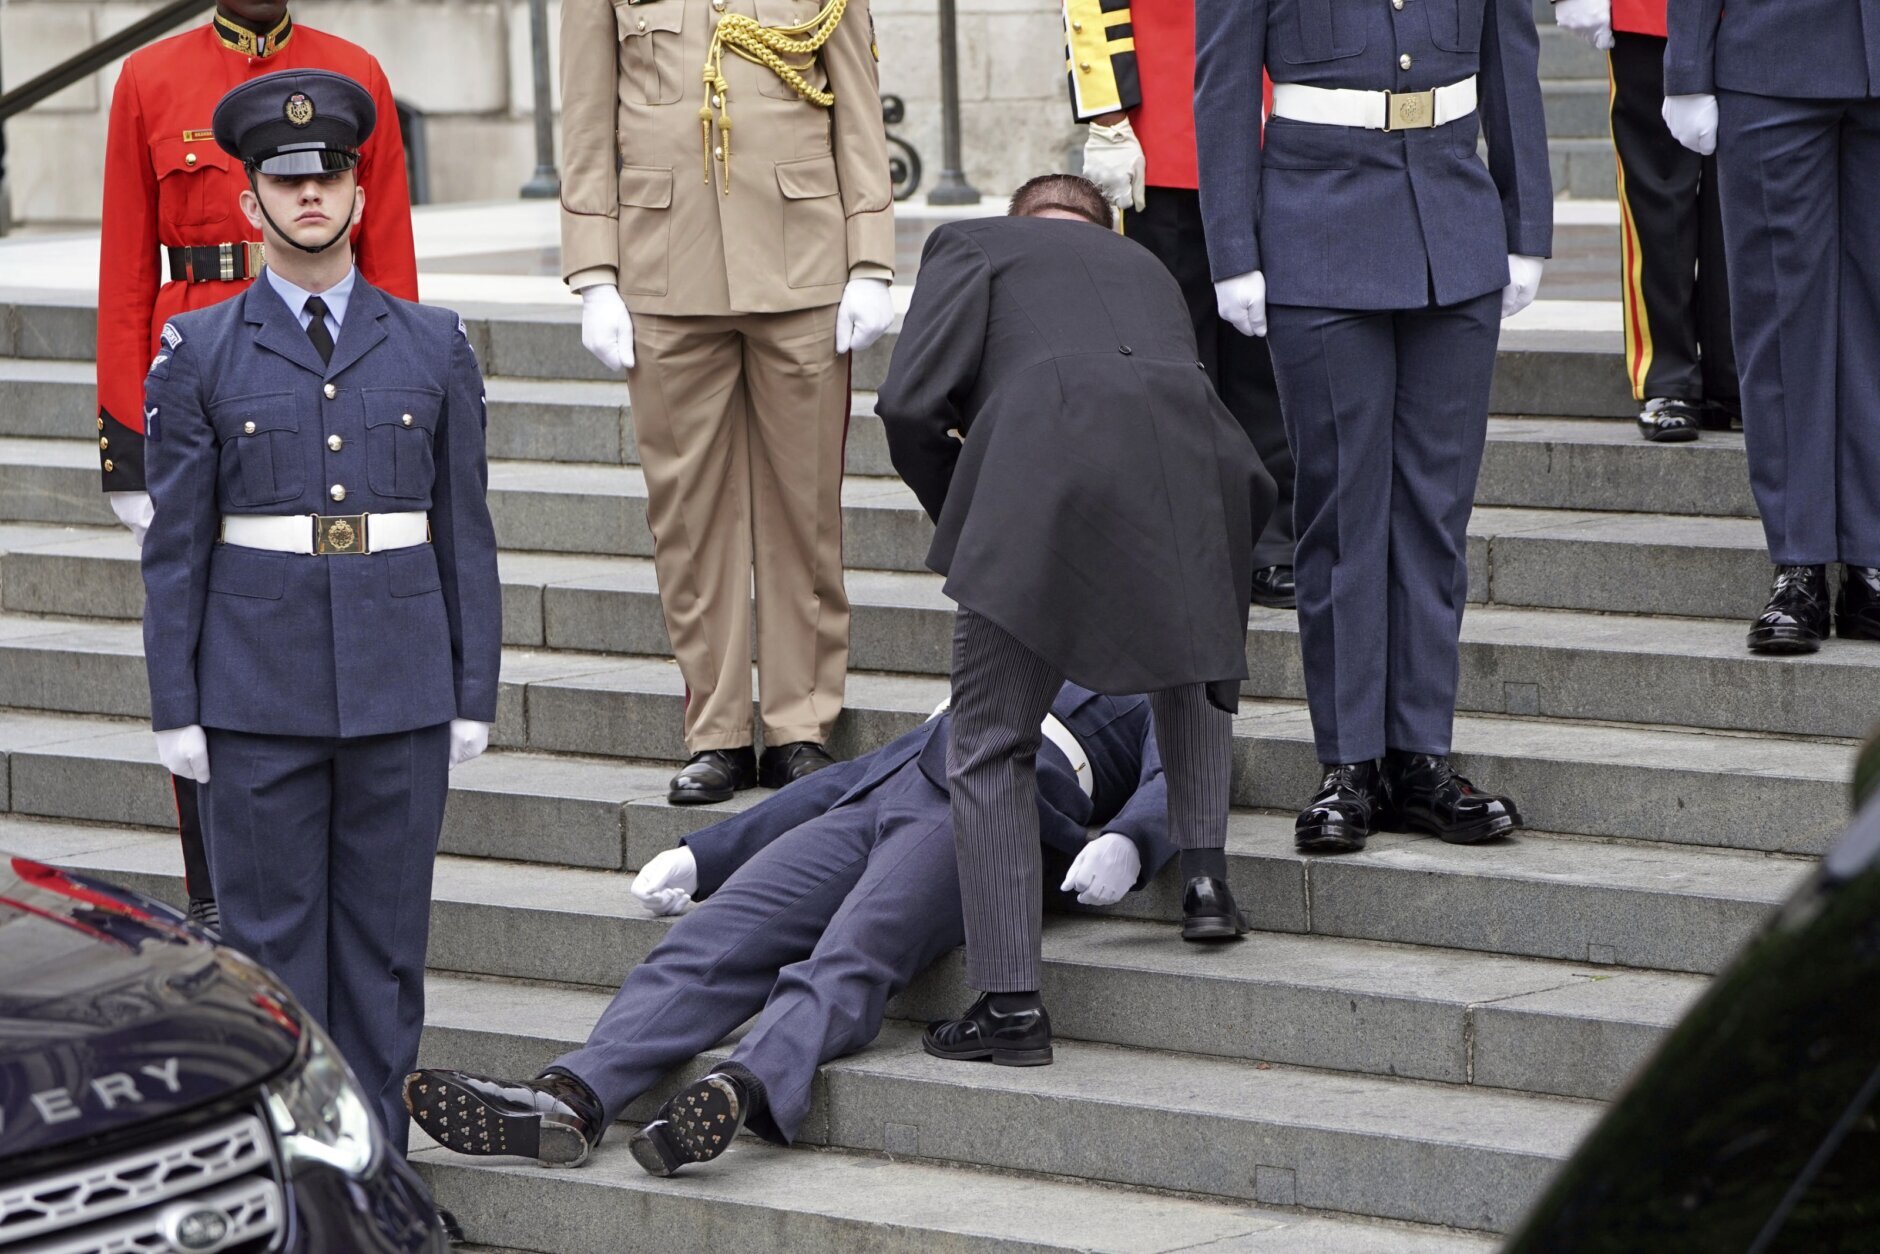 A Military personnel faints ahead of service of thanksgiving for the reign of Queen Elizabeth II at St Paul’s Cathedral in London, Friday June 3, 2022 on the second of four days of celebrations to mark the Platinum Jubilee. The events over a long holiday weekend in the U.K. are meant to celebrate the monarch’s 70 years of service. (Kirsty O'Connor, Pool Photo via AP)